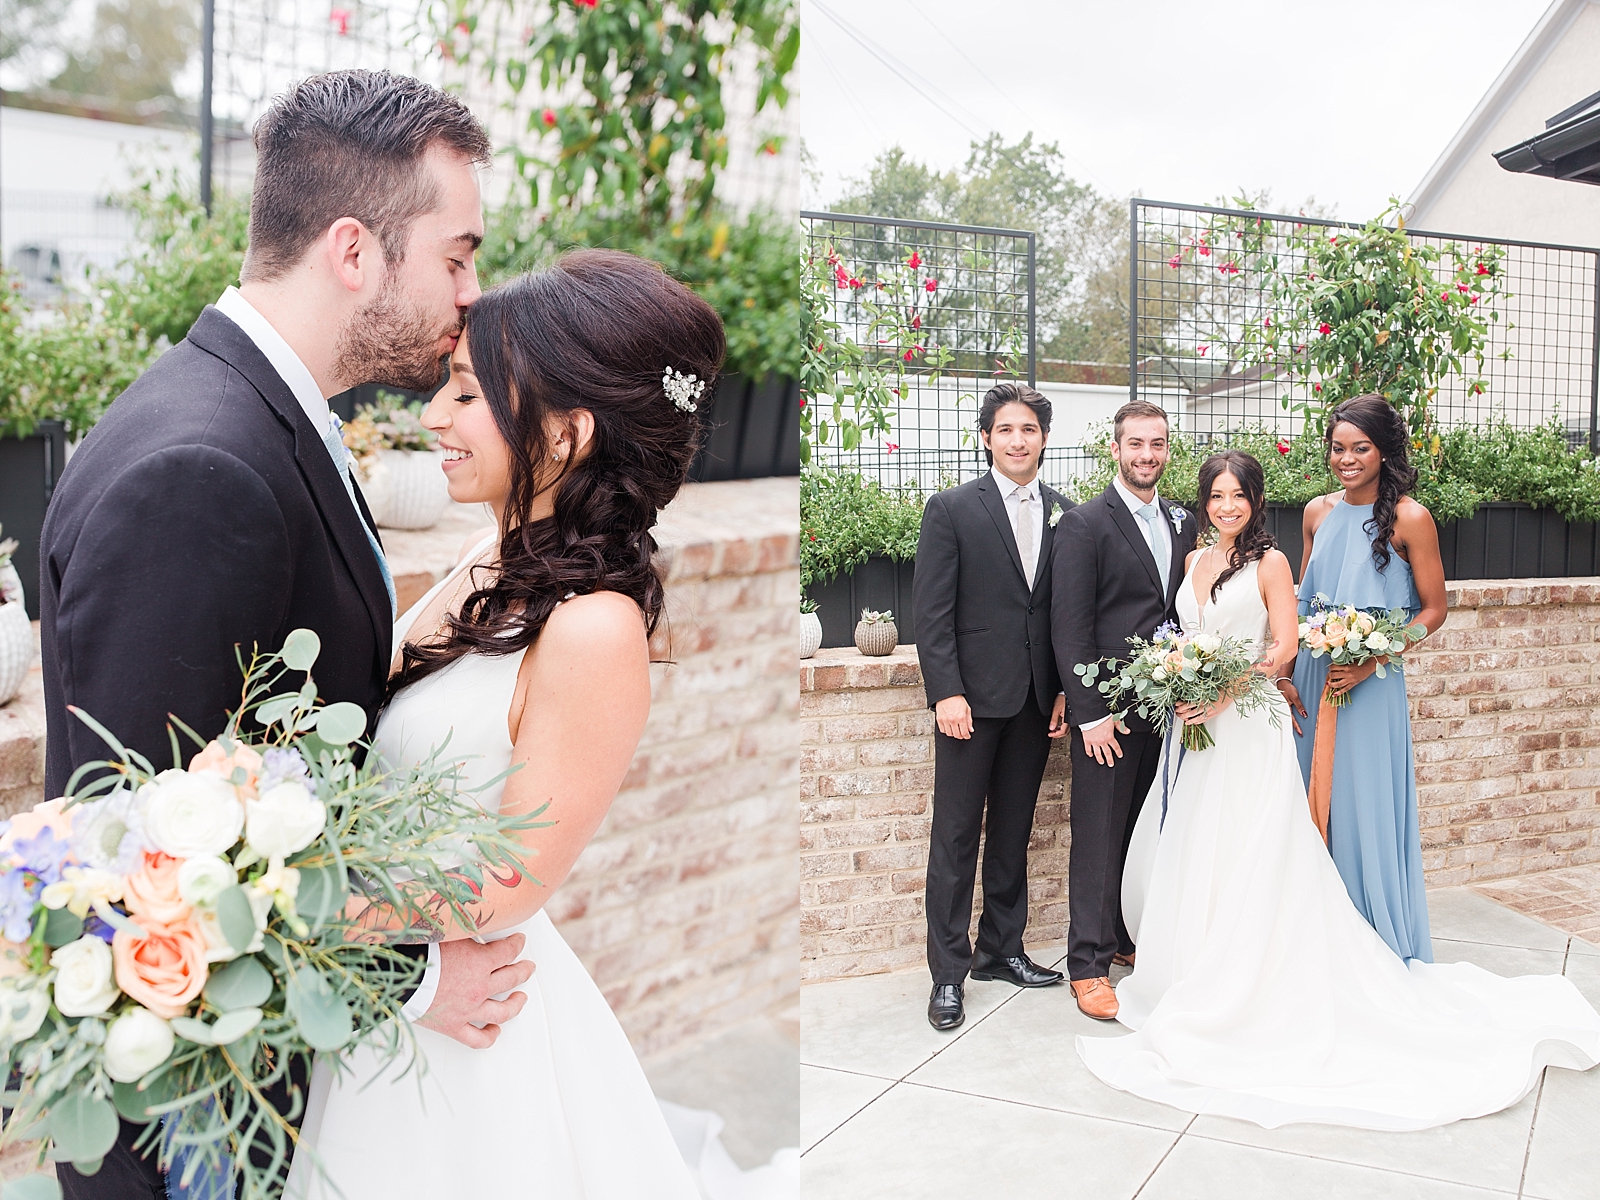 Glover Park Brewery Wedding Groom kissing bride on forehead and bridal party Photos